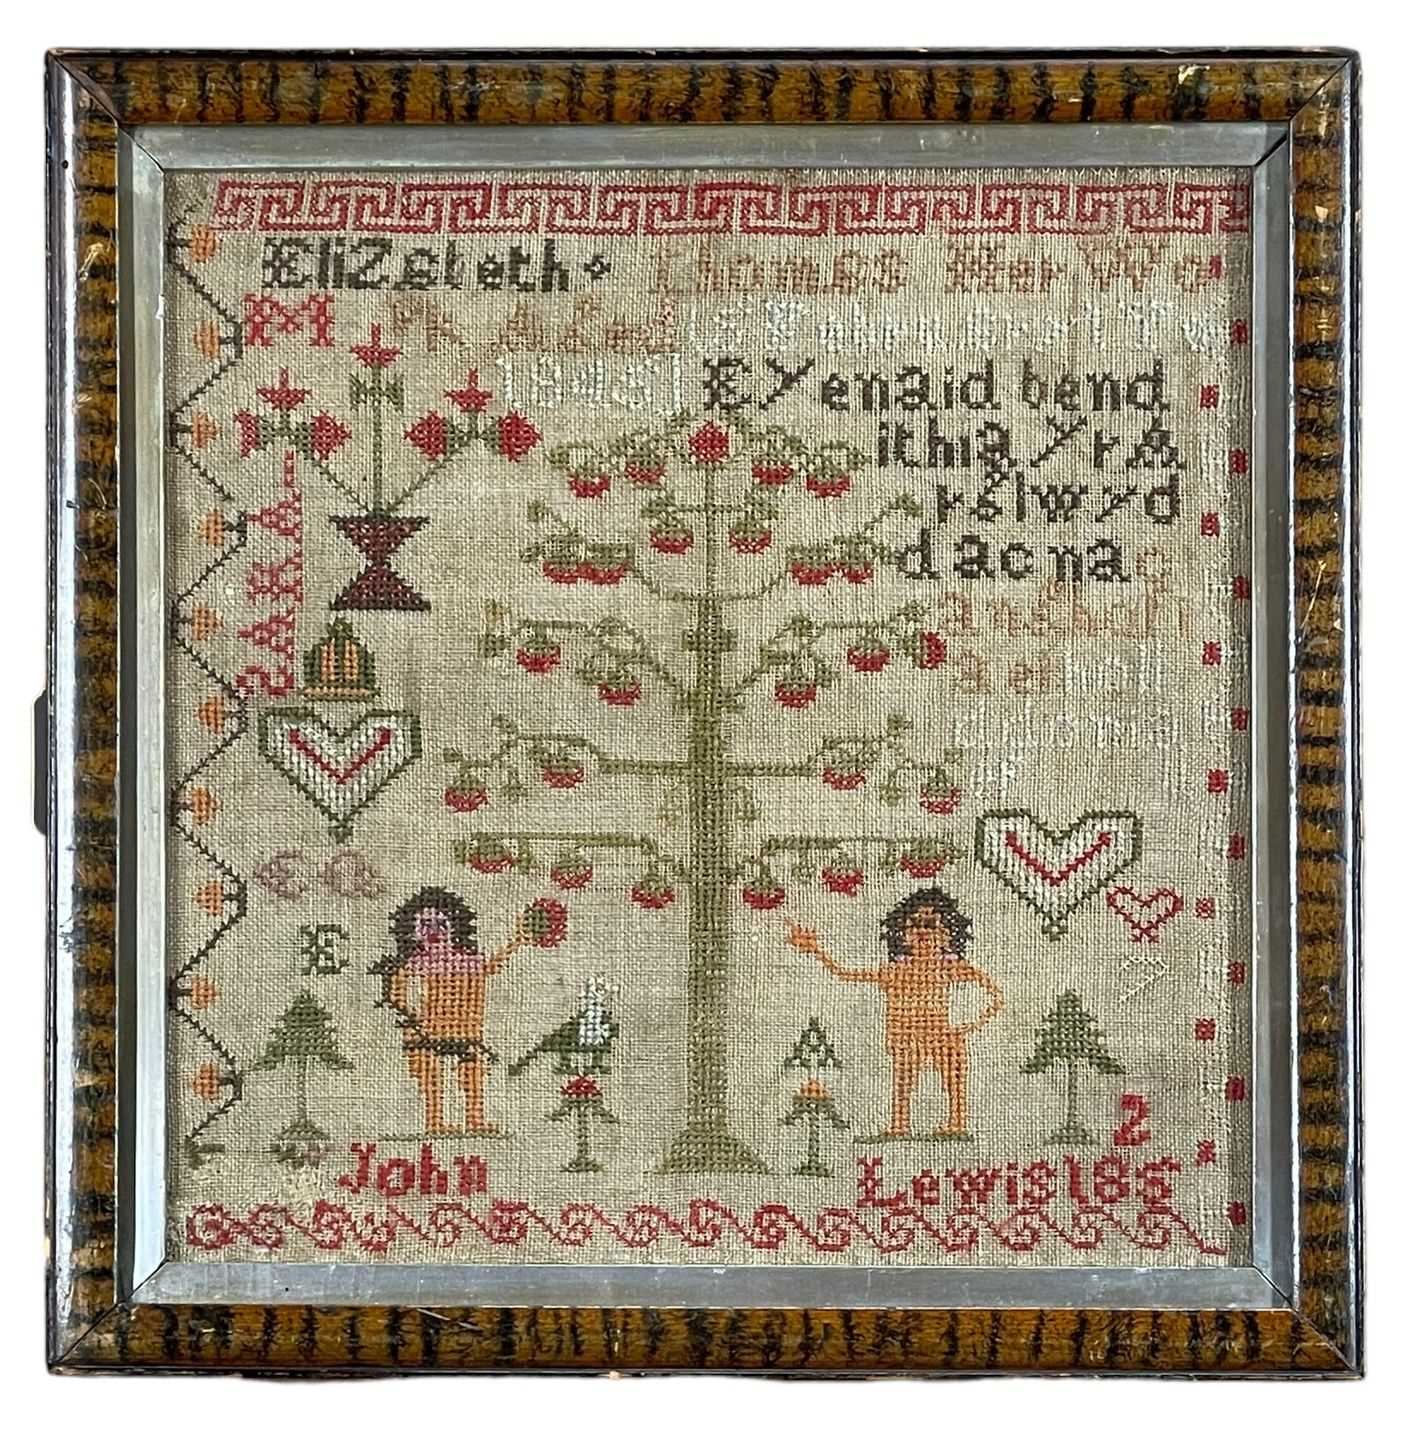 WELSH & ENGLISH LANGUAGE WOOLWORK SAMPLER showing Adam and Eve flanking the apple tree, above ' - Image 2 of 2